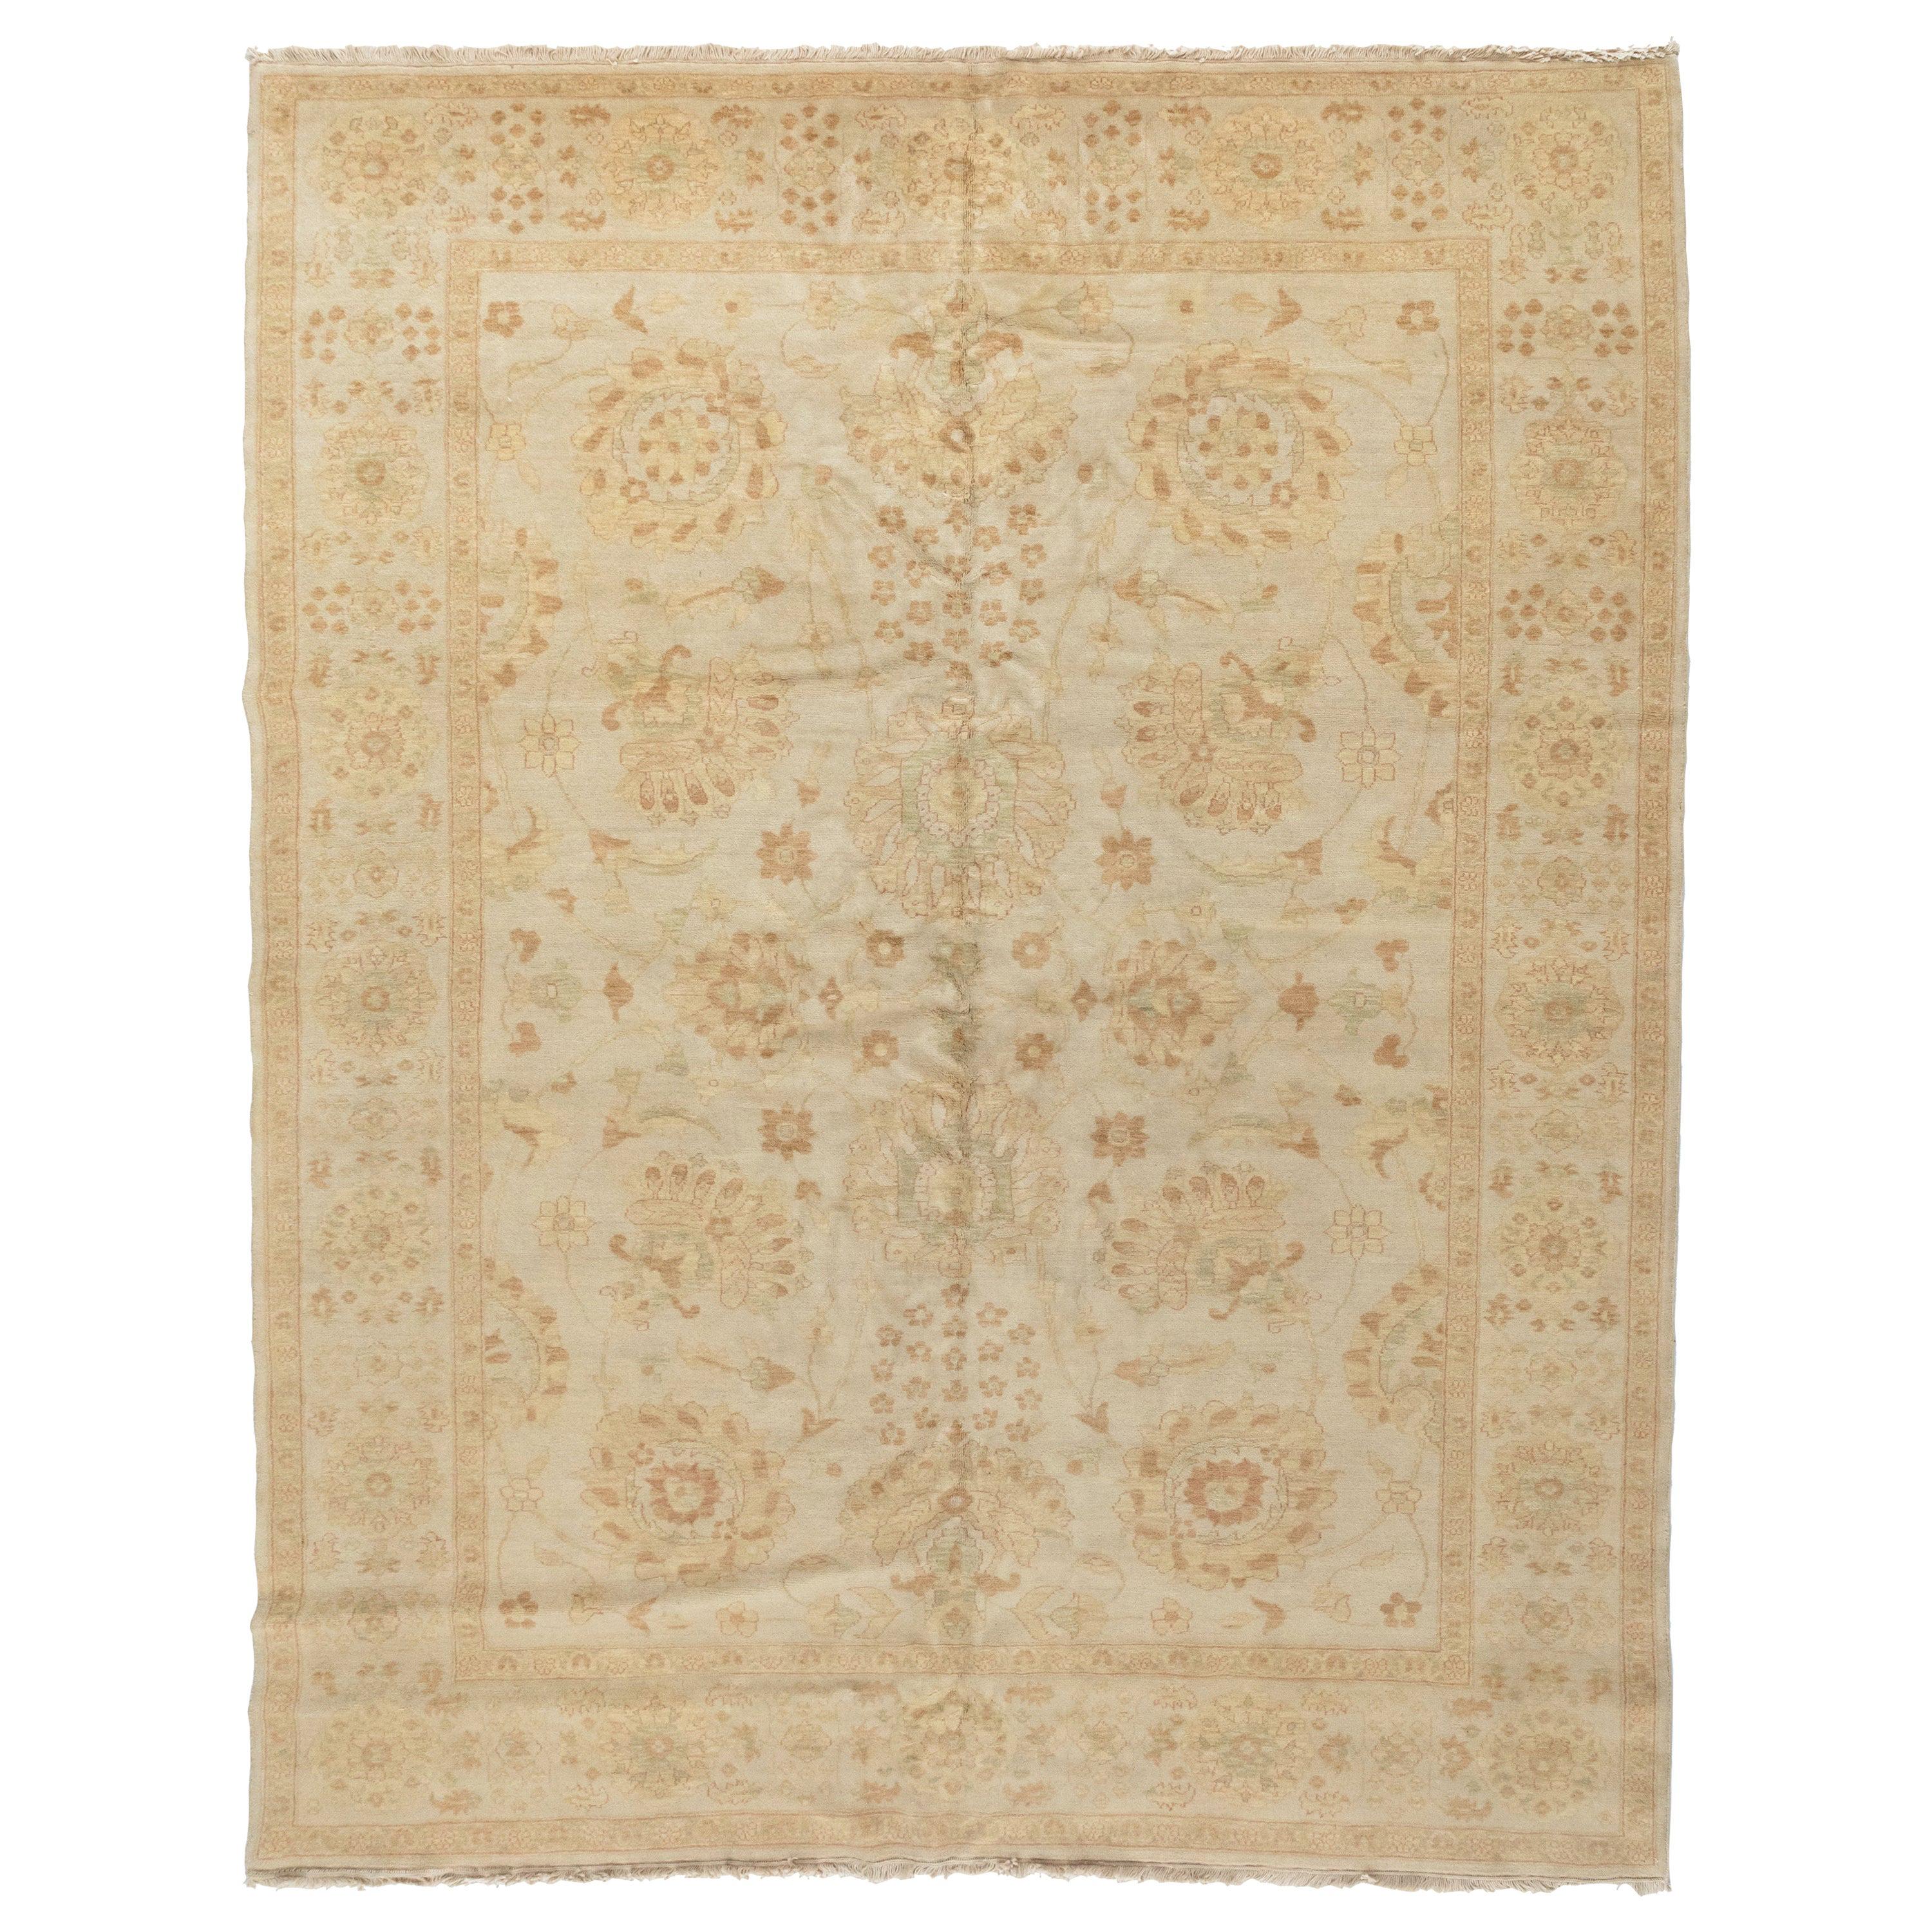 Late 20th Century Handmade Floral Ivory Egyptian Rug Persian Sultanabad Design